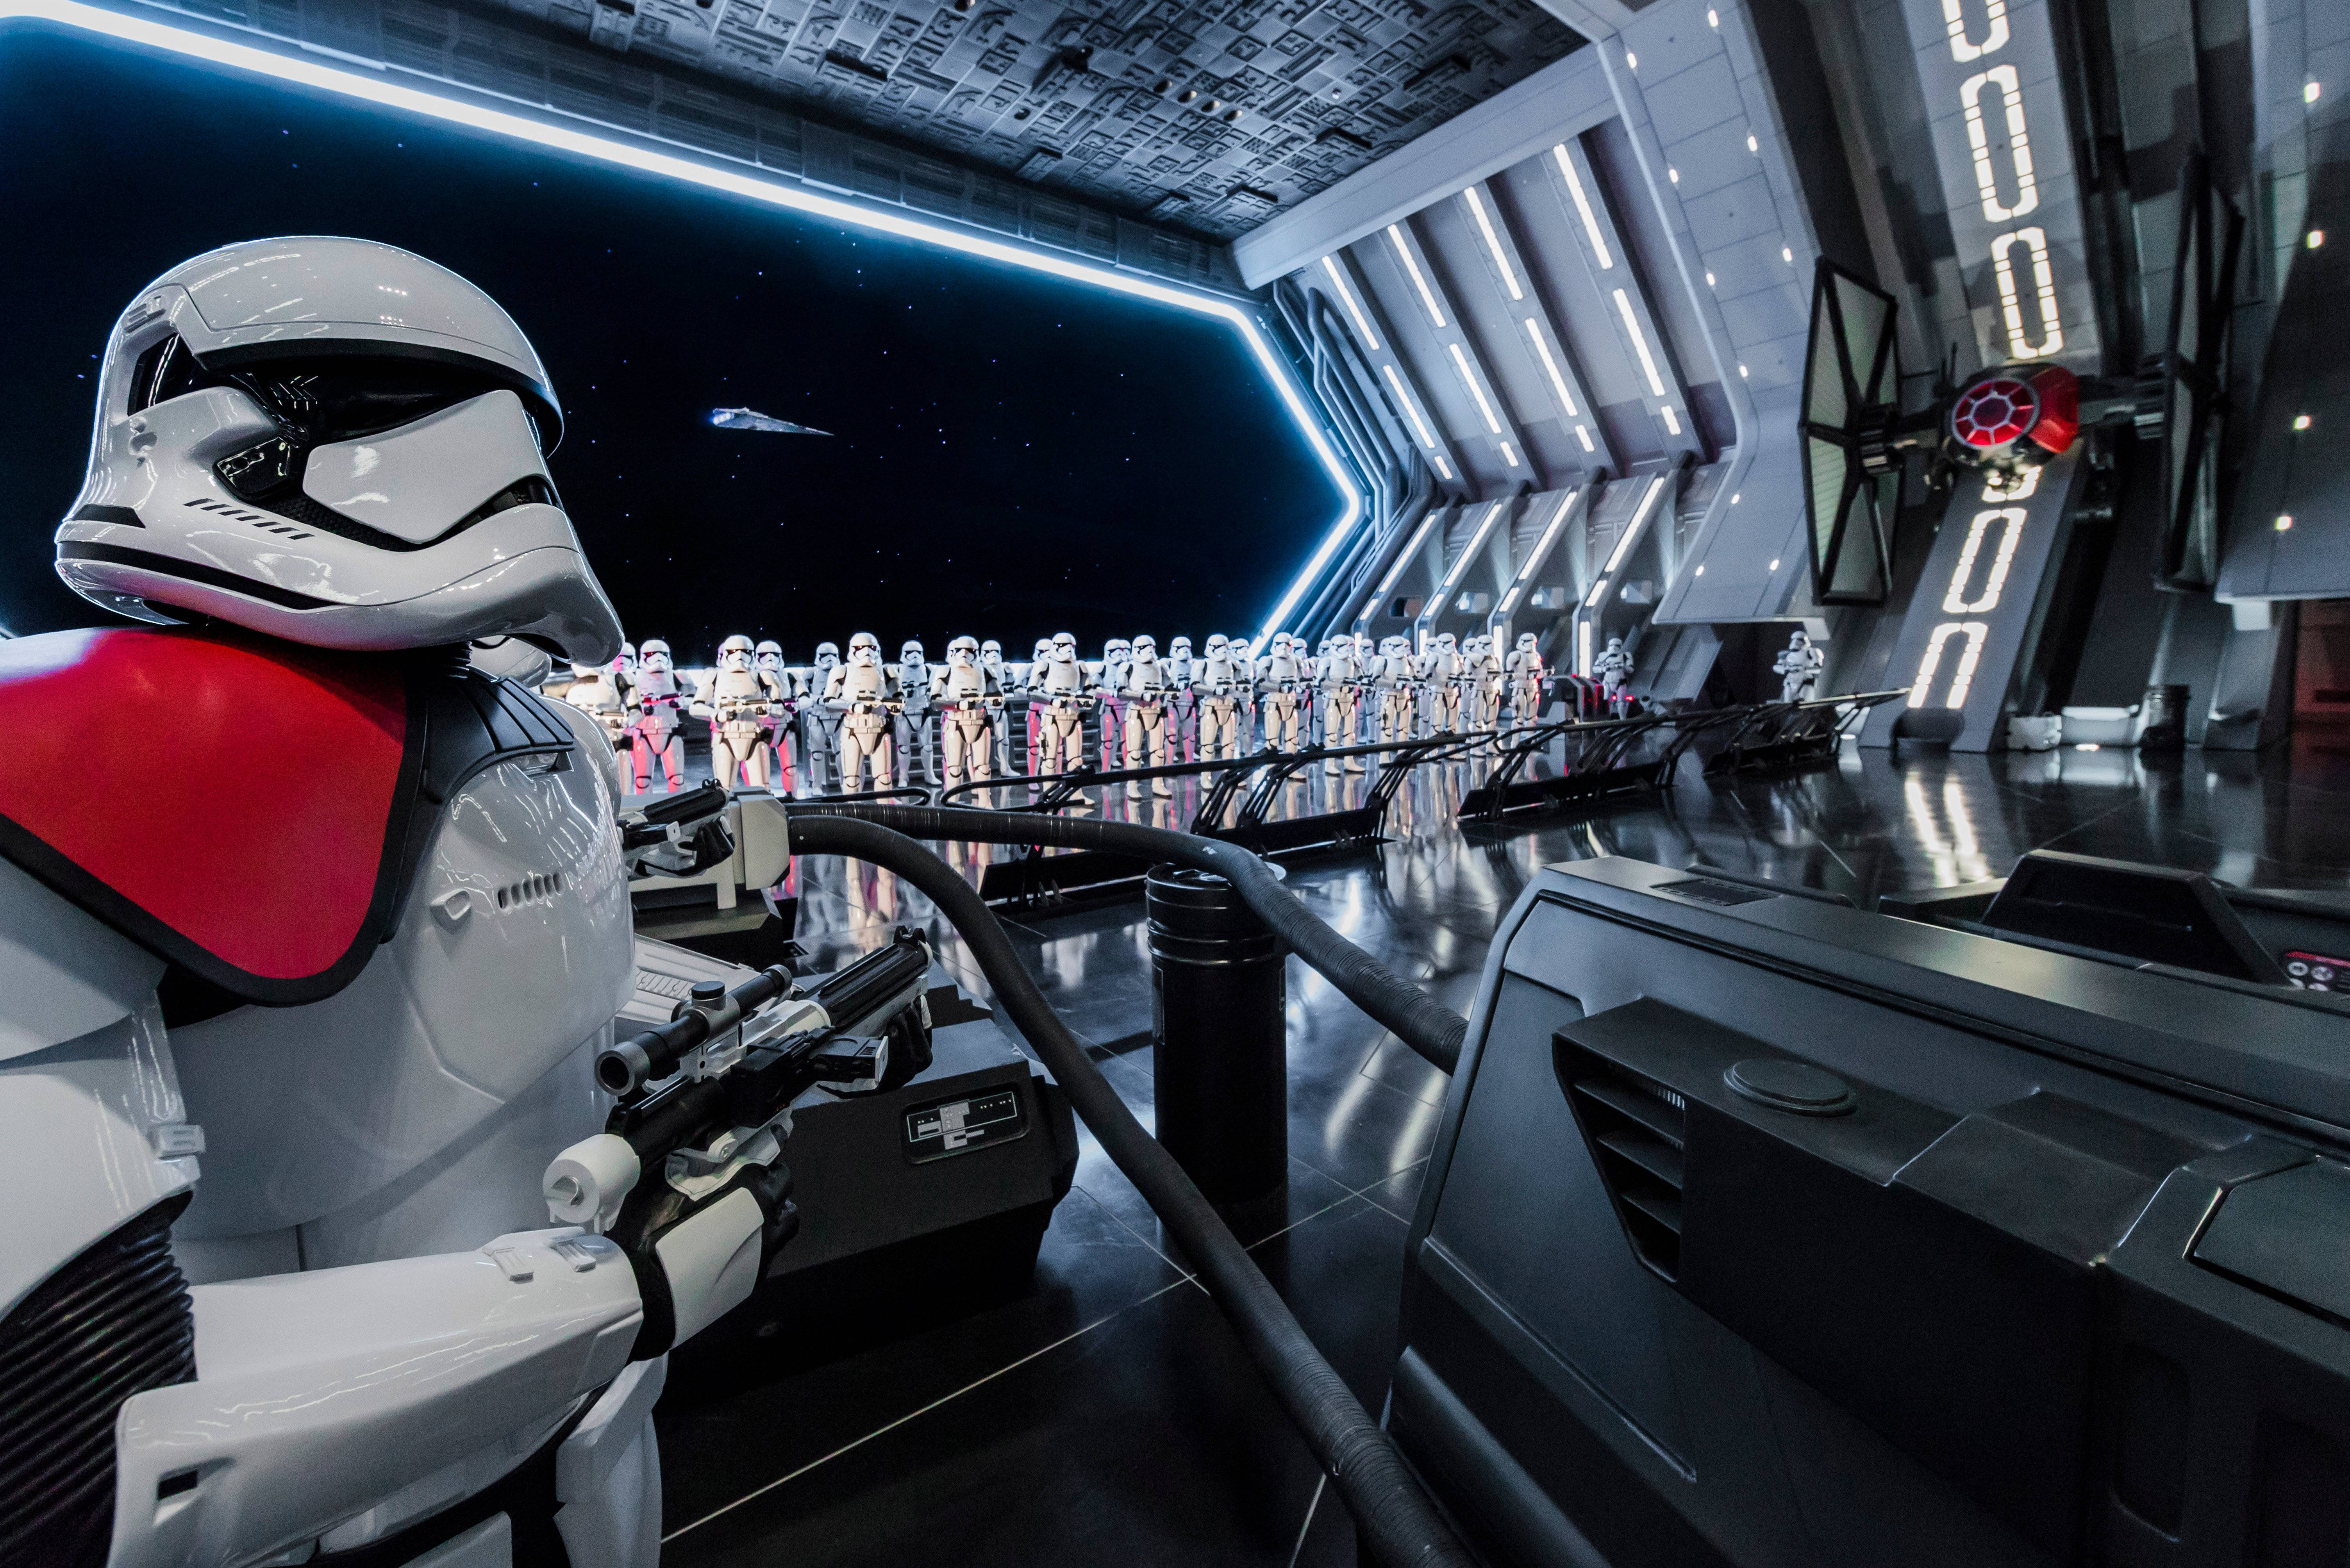 Virtual queue for Star Wars: Rise of the Resistance continues to follow similar pattern